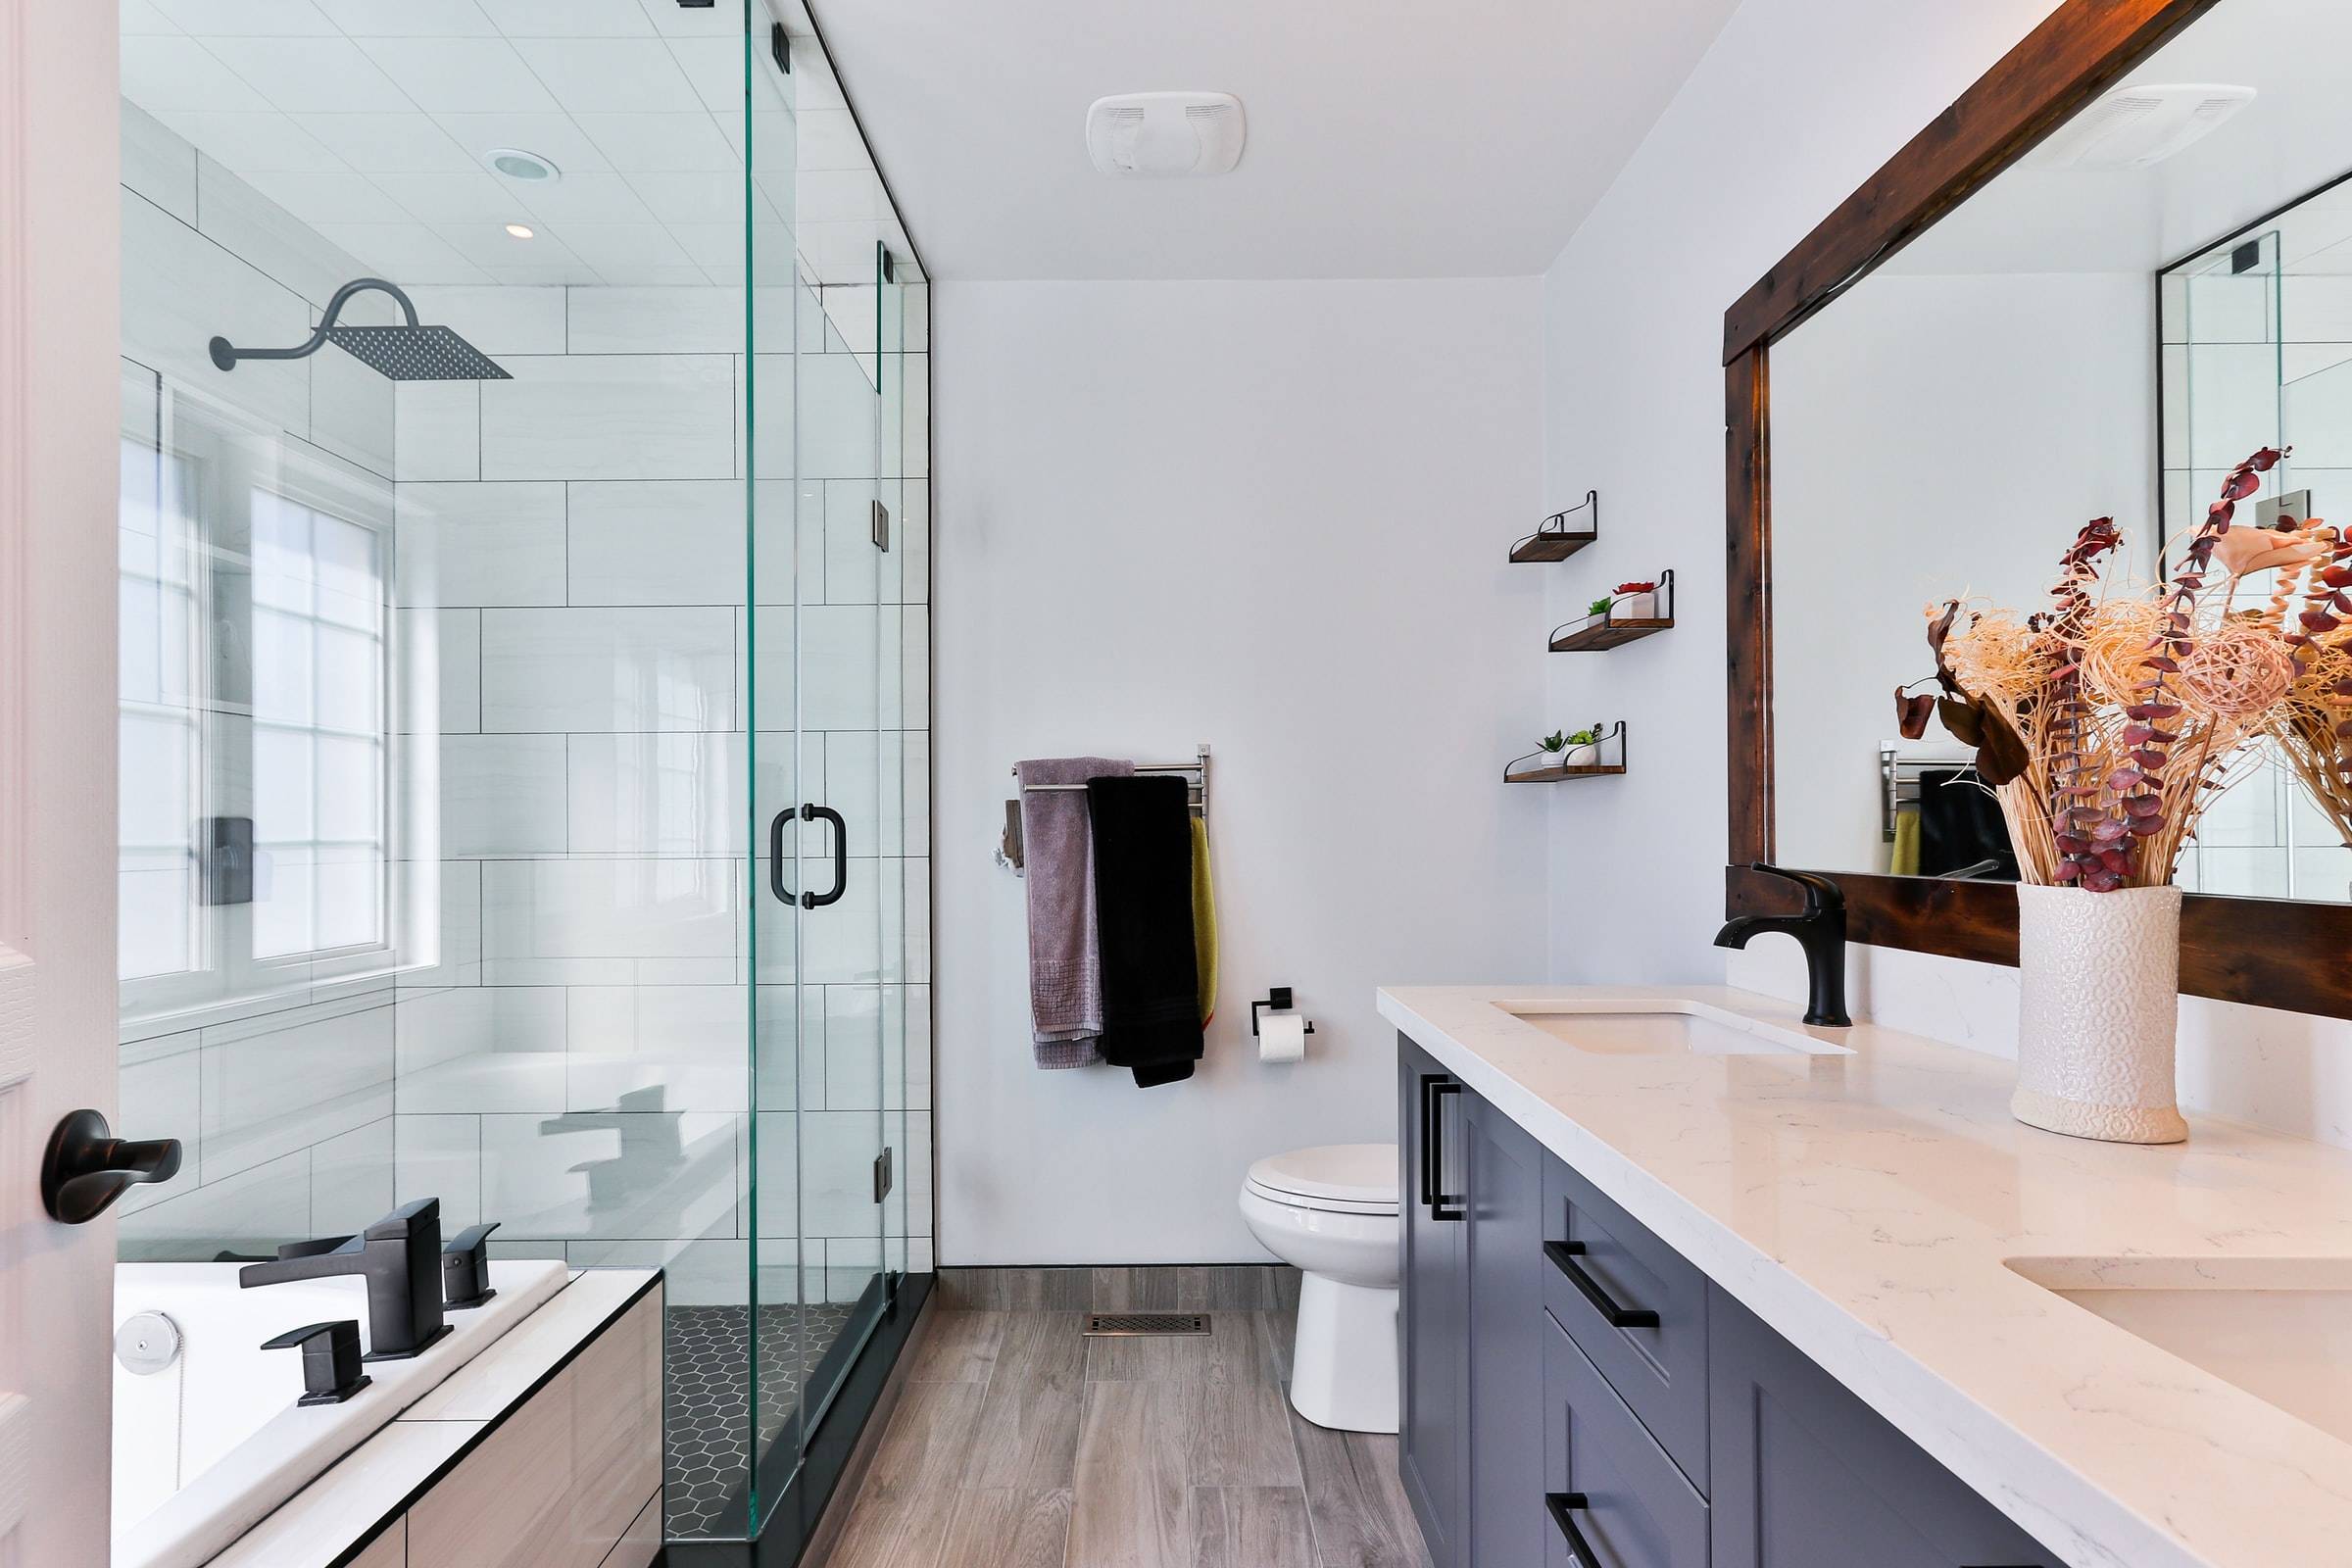 Jack and Jill bathroom with sleek glass shower (from Unsplash)